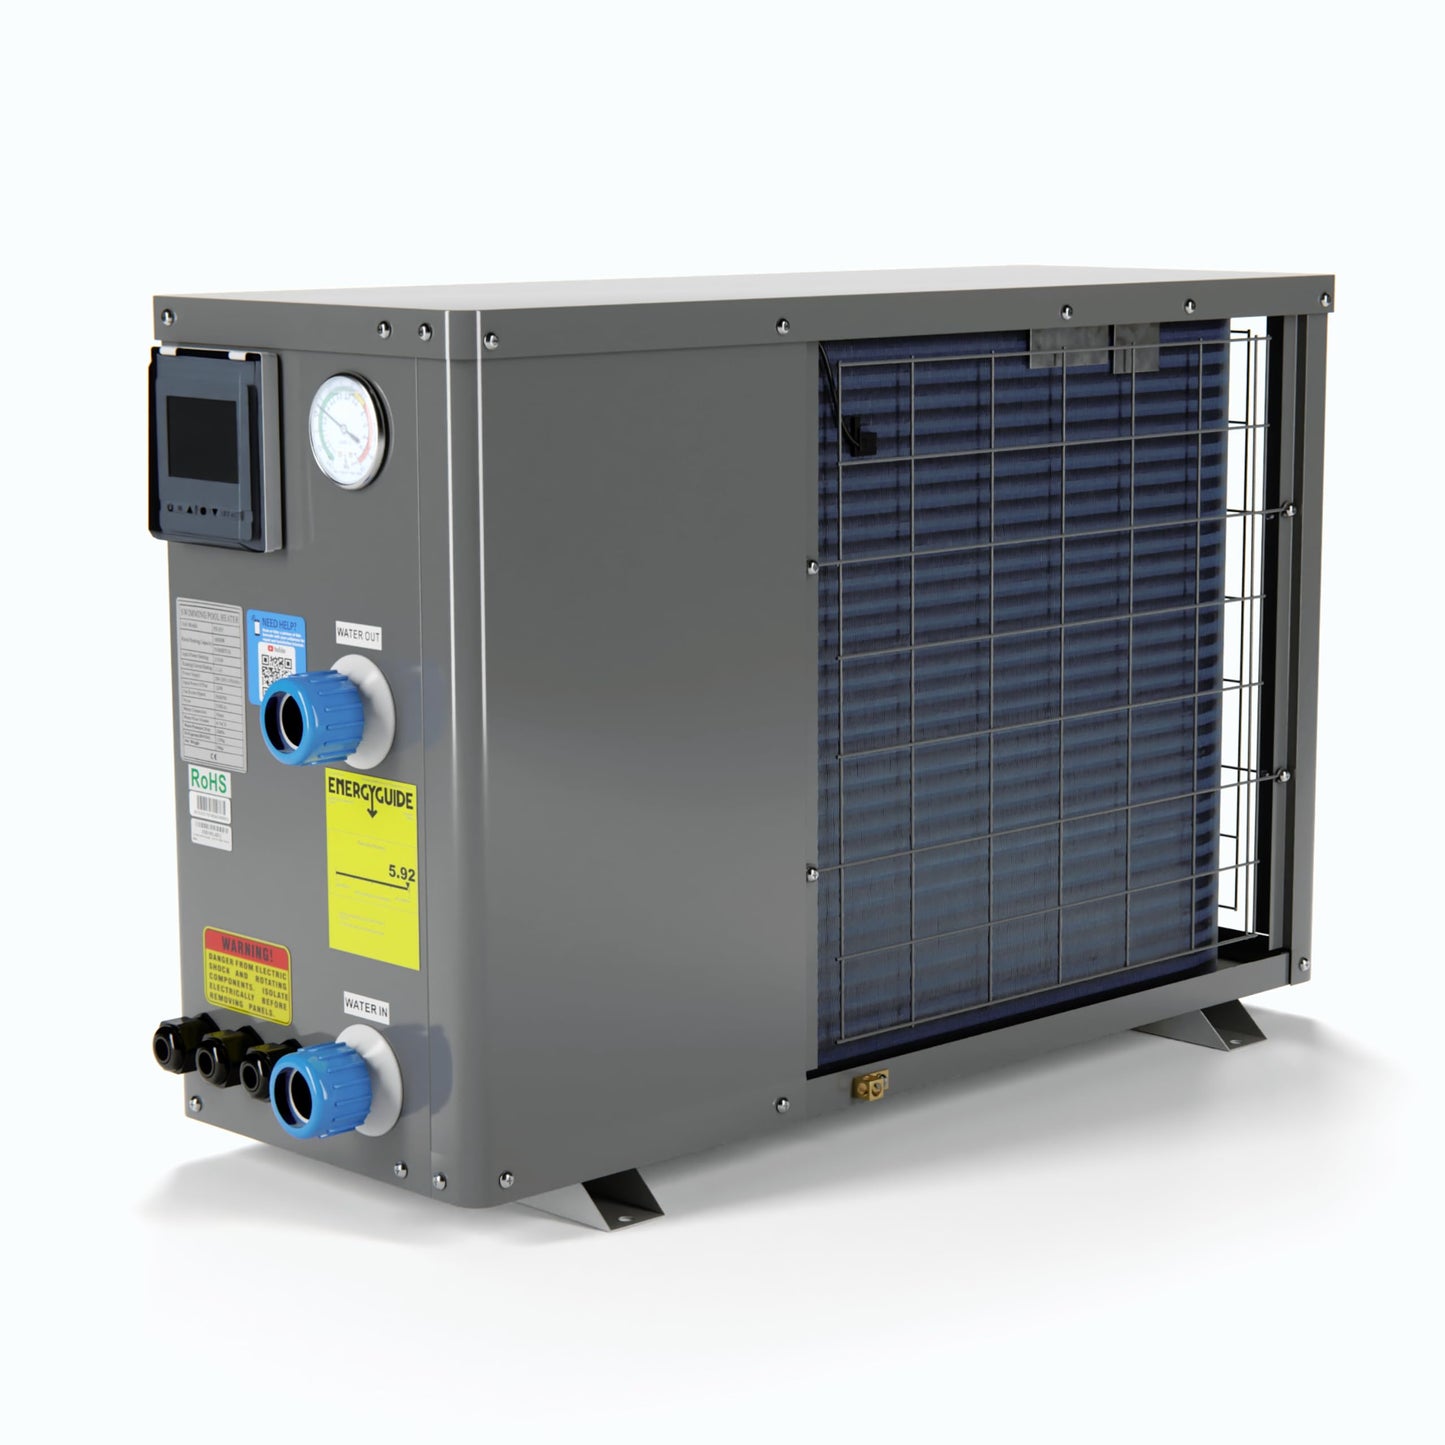 FibroPool Swimming Pool Heat Pump - FH255 55,000 BTU - for Above and In Ground Pools and Spas - High Efficiency, All Electric Heater - No Natural Gas or Propane Needed